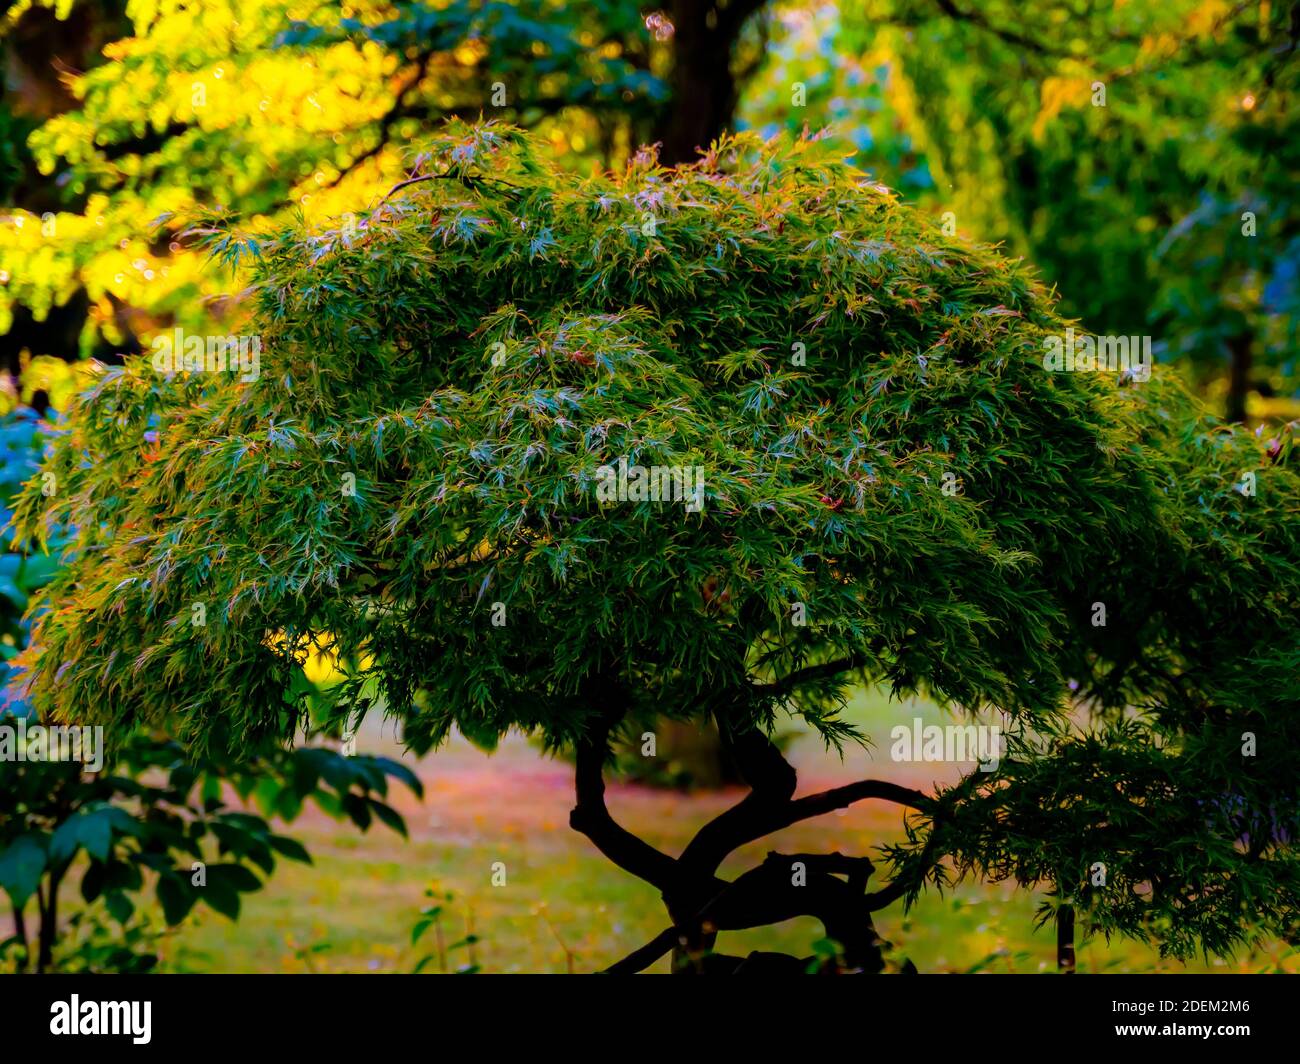 Green Japanese maple tree in a large bonsai form growing in a lush green park. . High quality photo Stock Photo